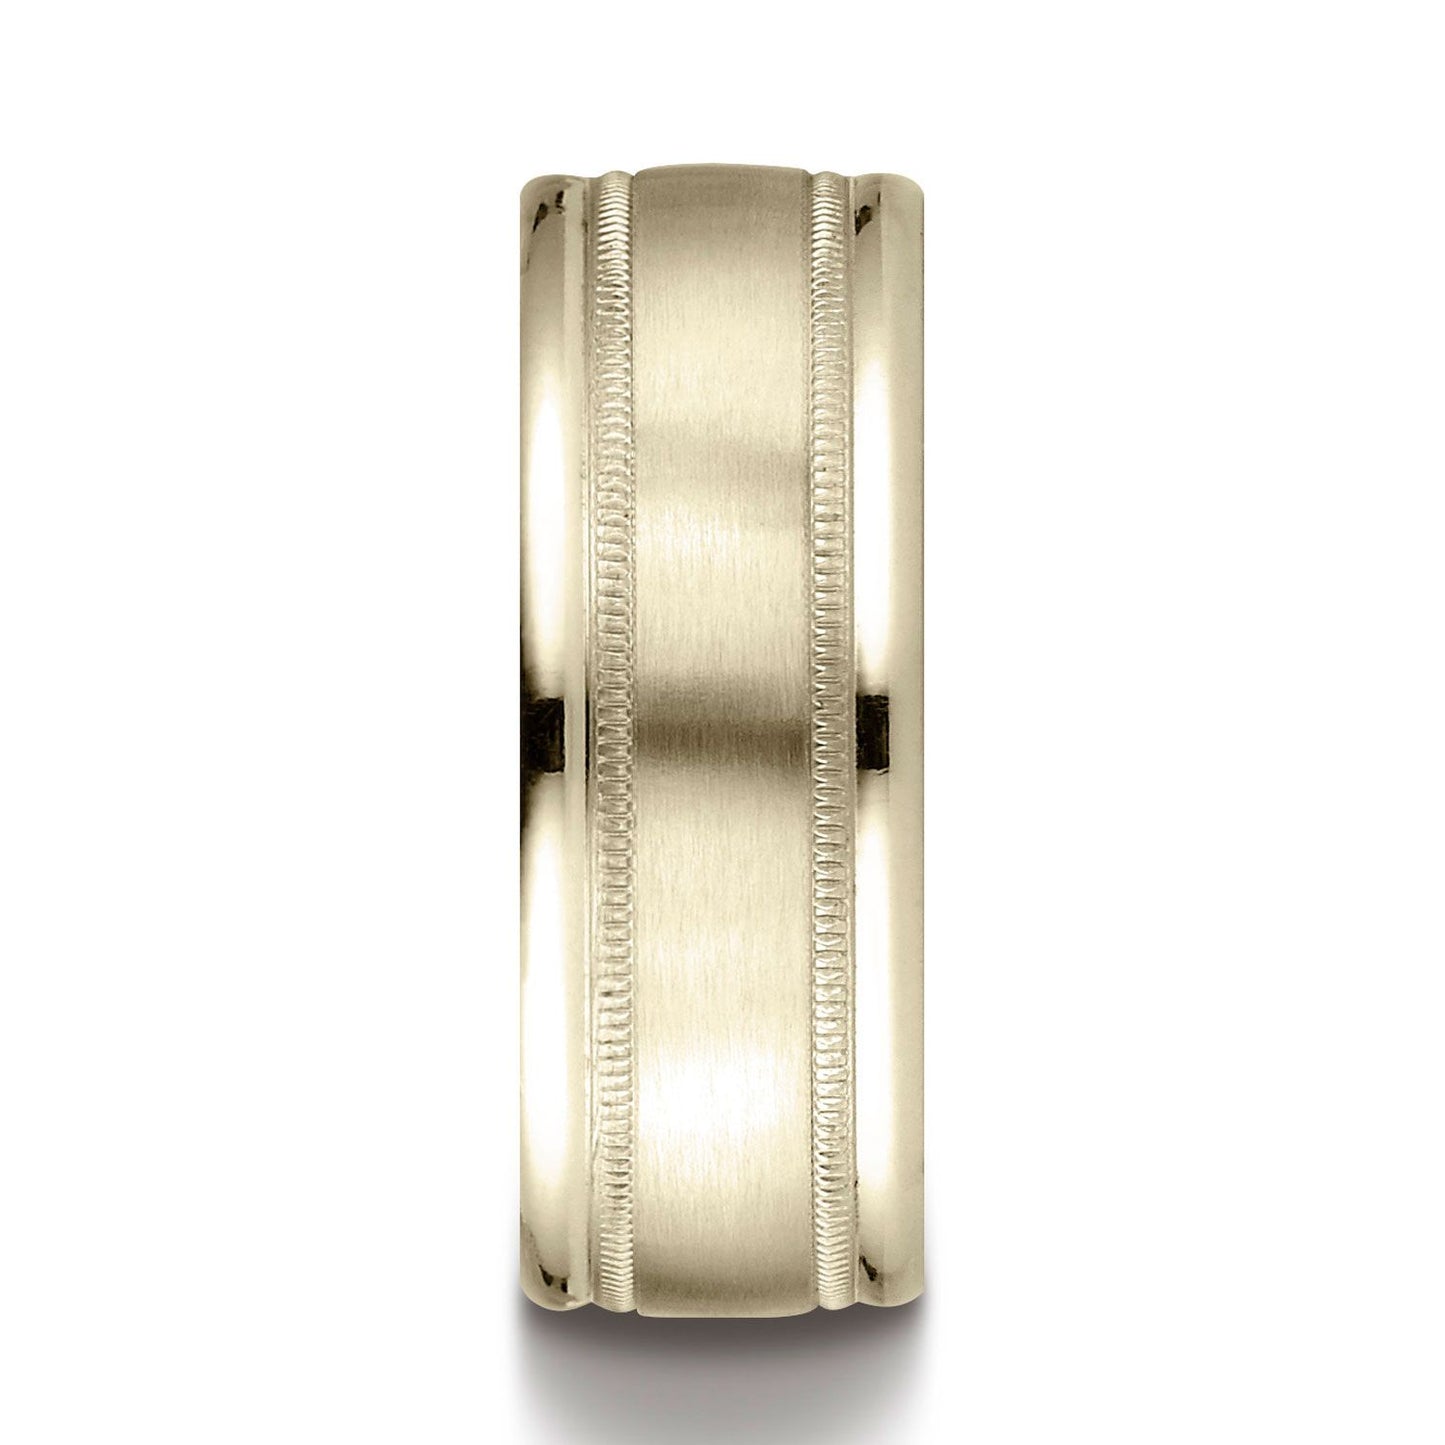 14k Yellow Gold 8mm Comfort-fit Satin Finish Center With Milgrain Round Edge Carved Design Band